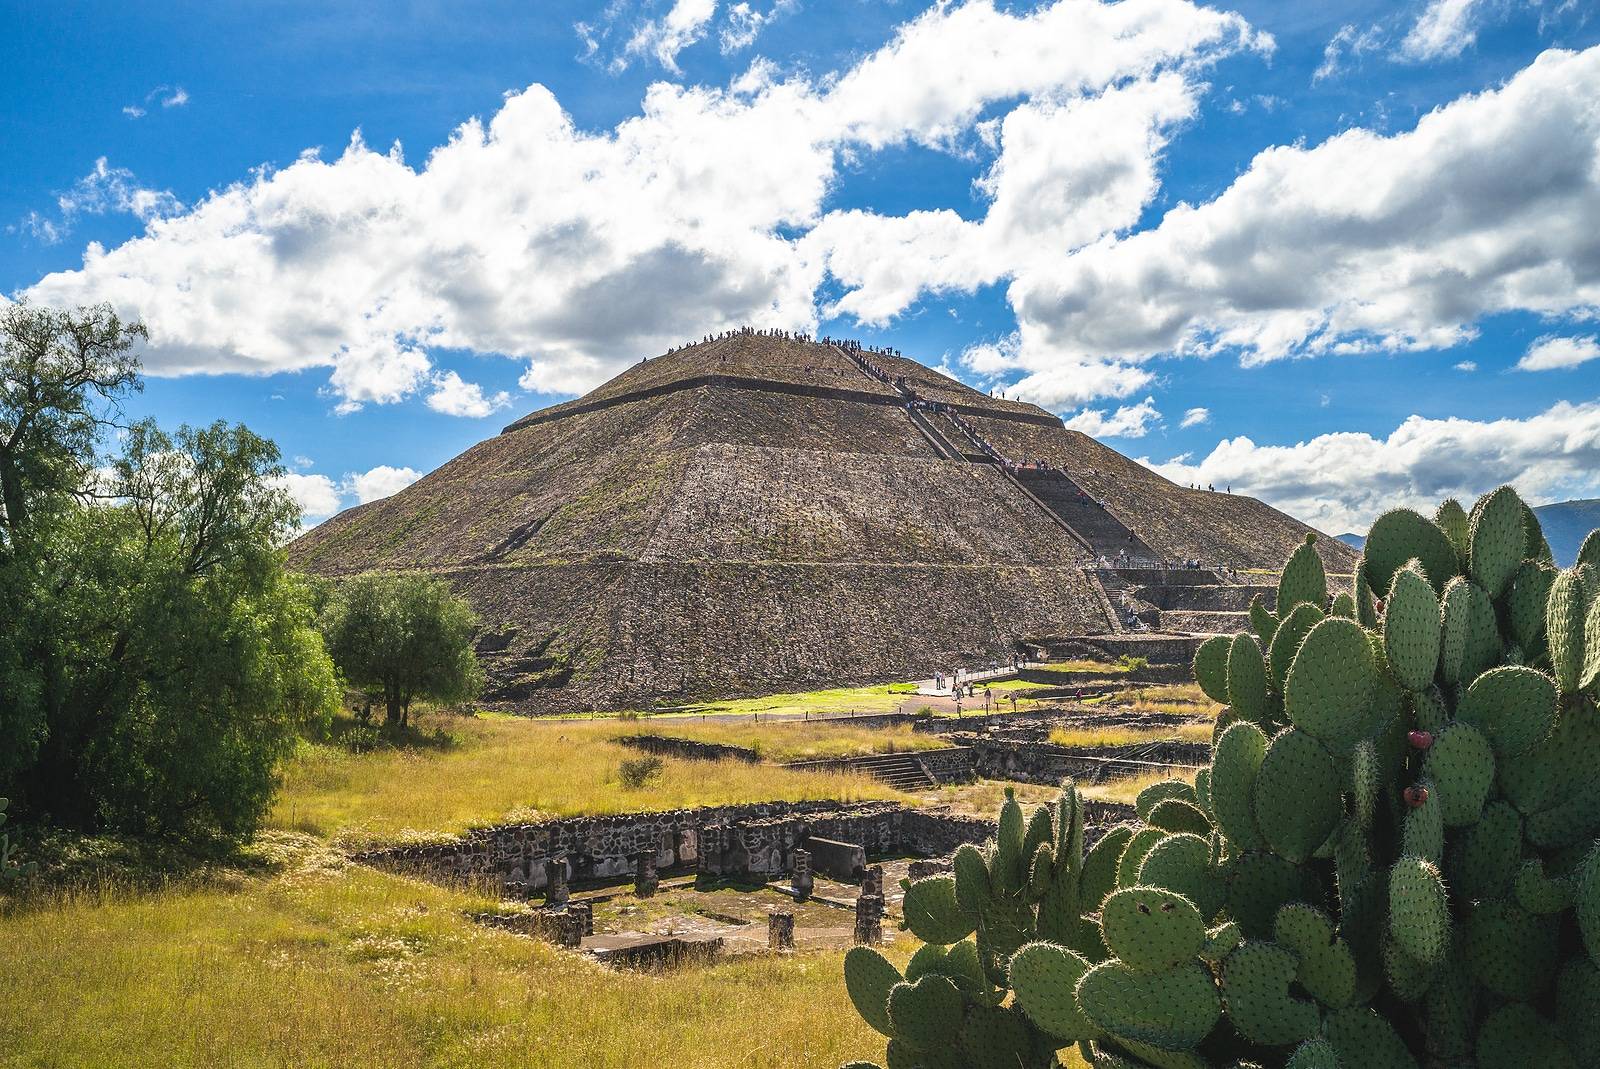 Scenery Of Pyramid Of Sun In Teotihuacan, Mexico